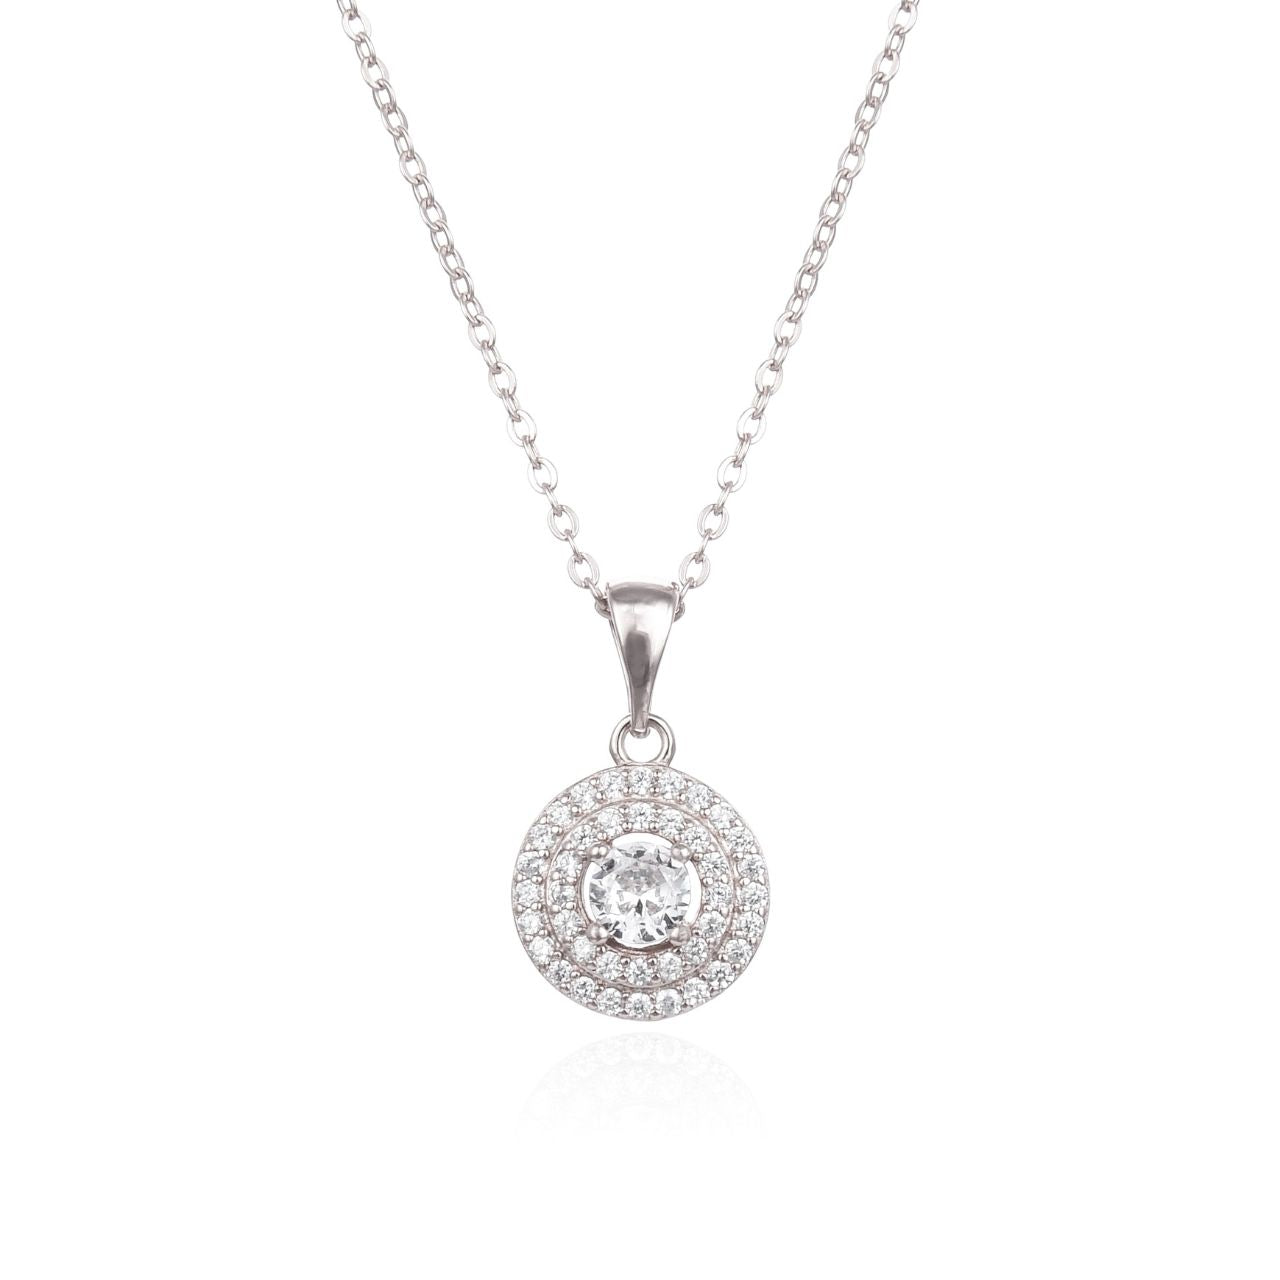 Silver Double Halo Necklace  Sterling silver double halo necklace with cubic zirconia stones.